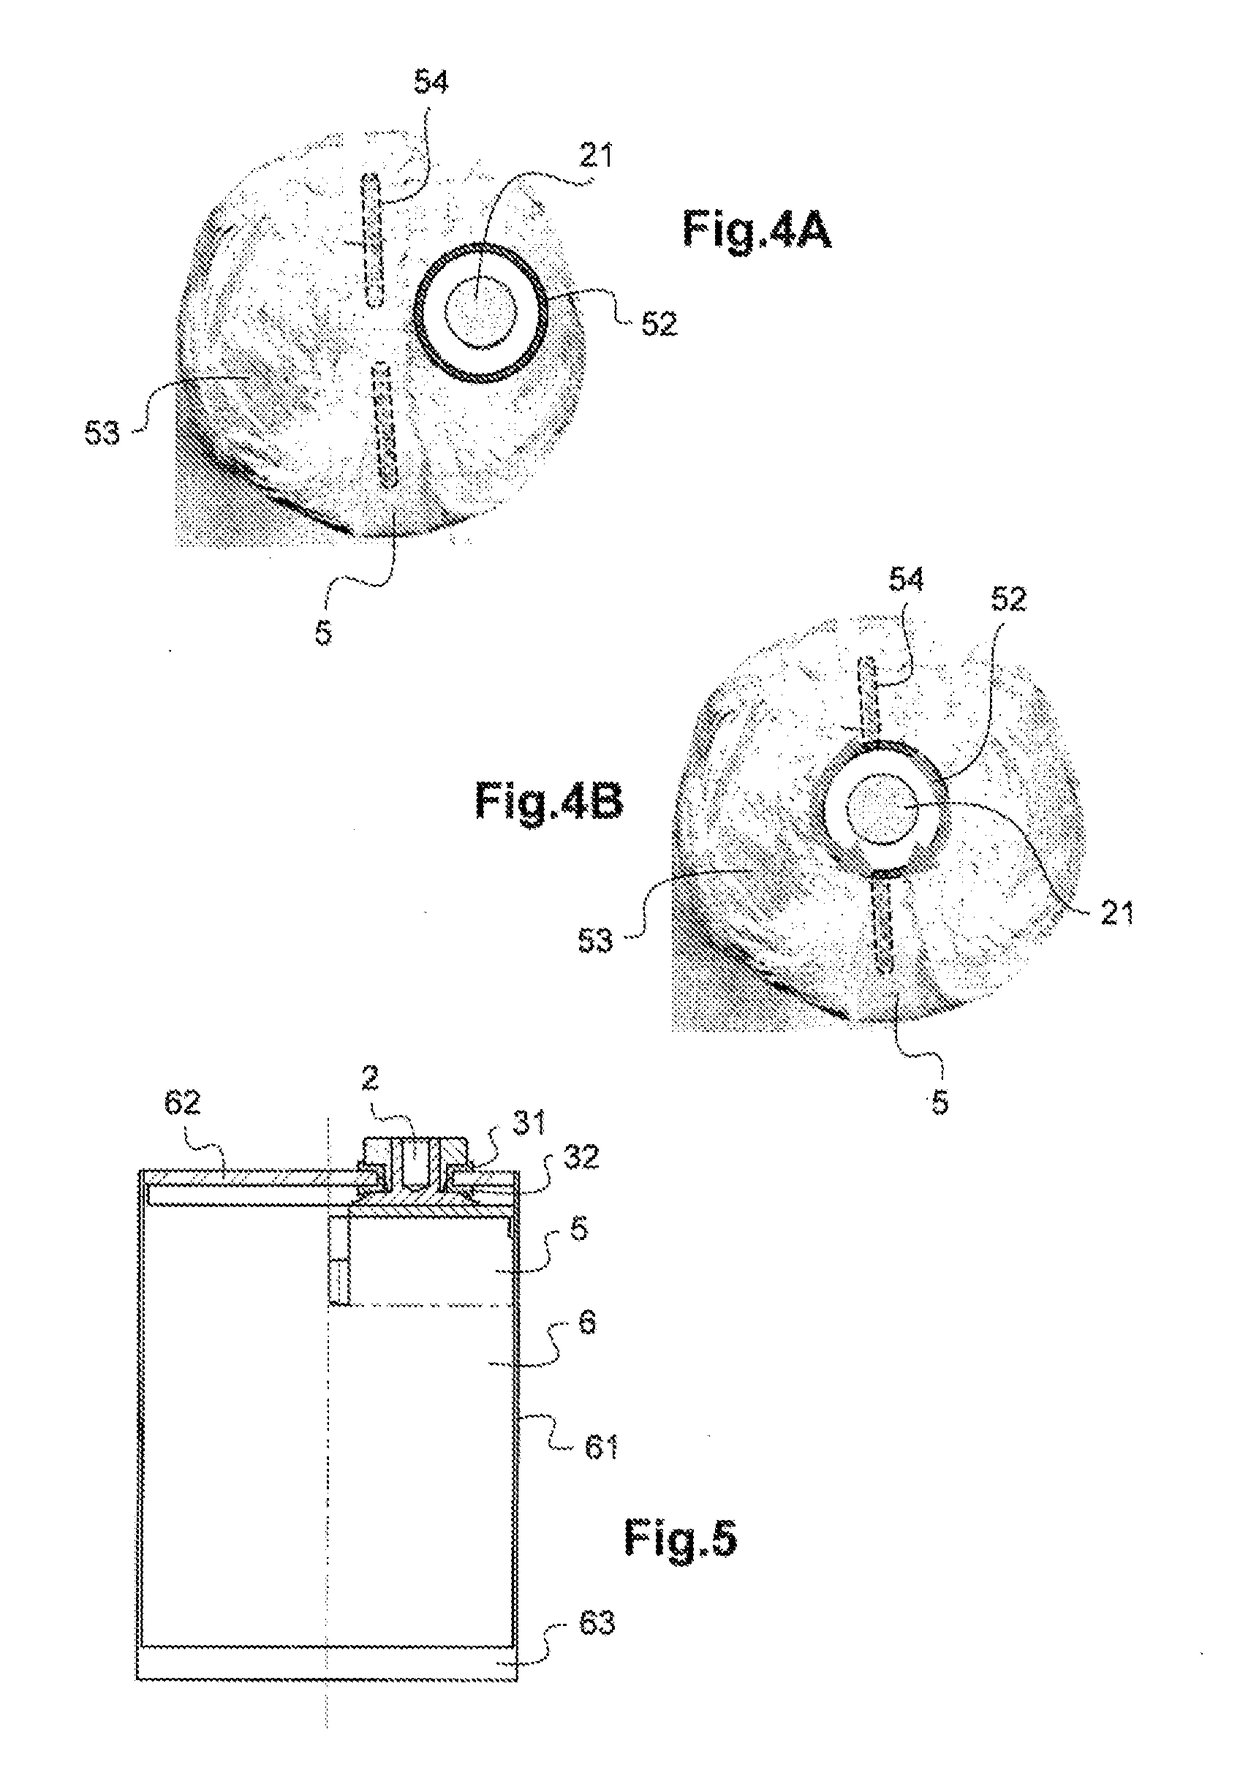 Lithium electrochemical accumulator having a terminal directly connected to the electrochemical assembly and associated production methods